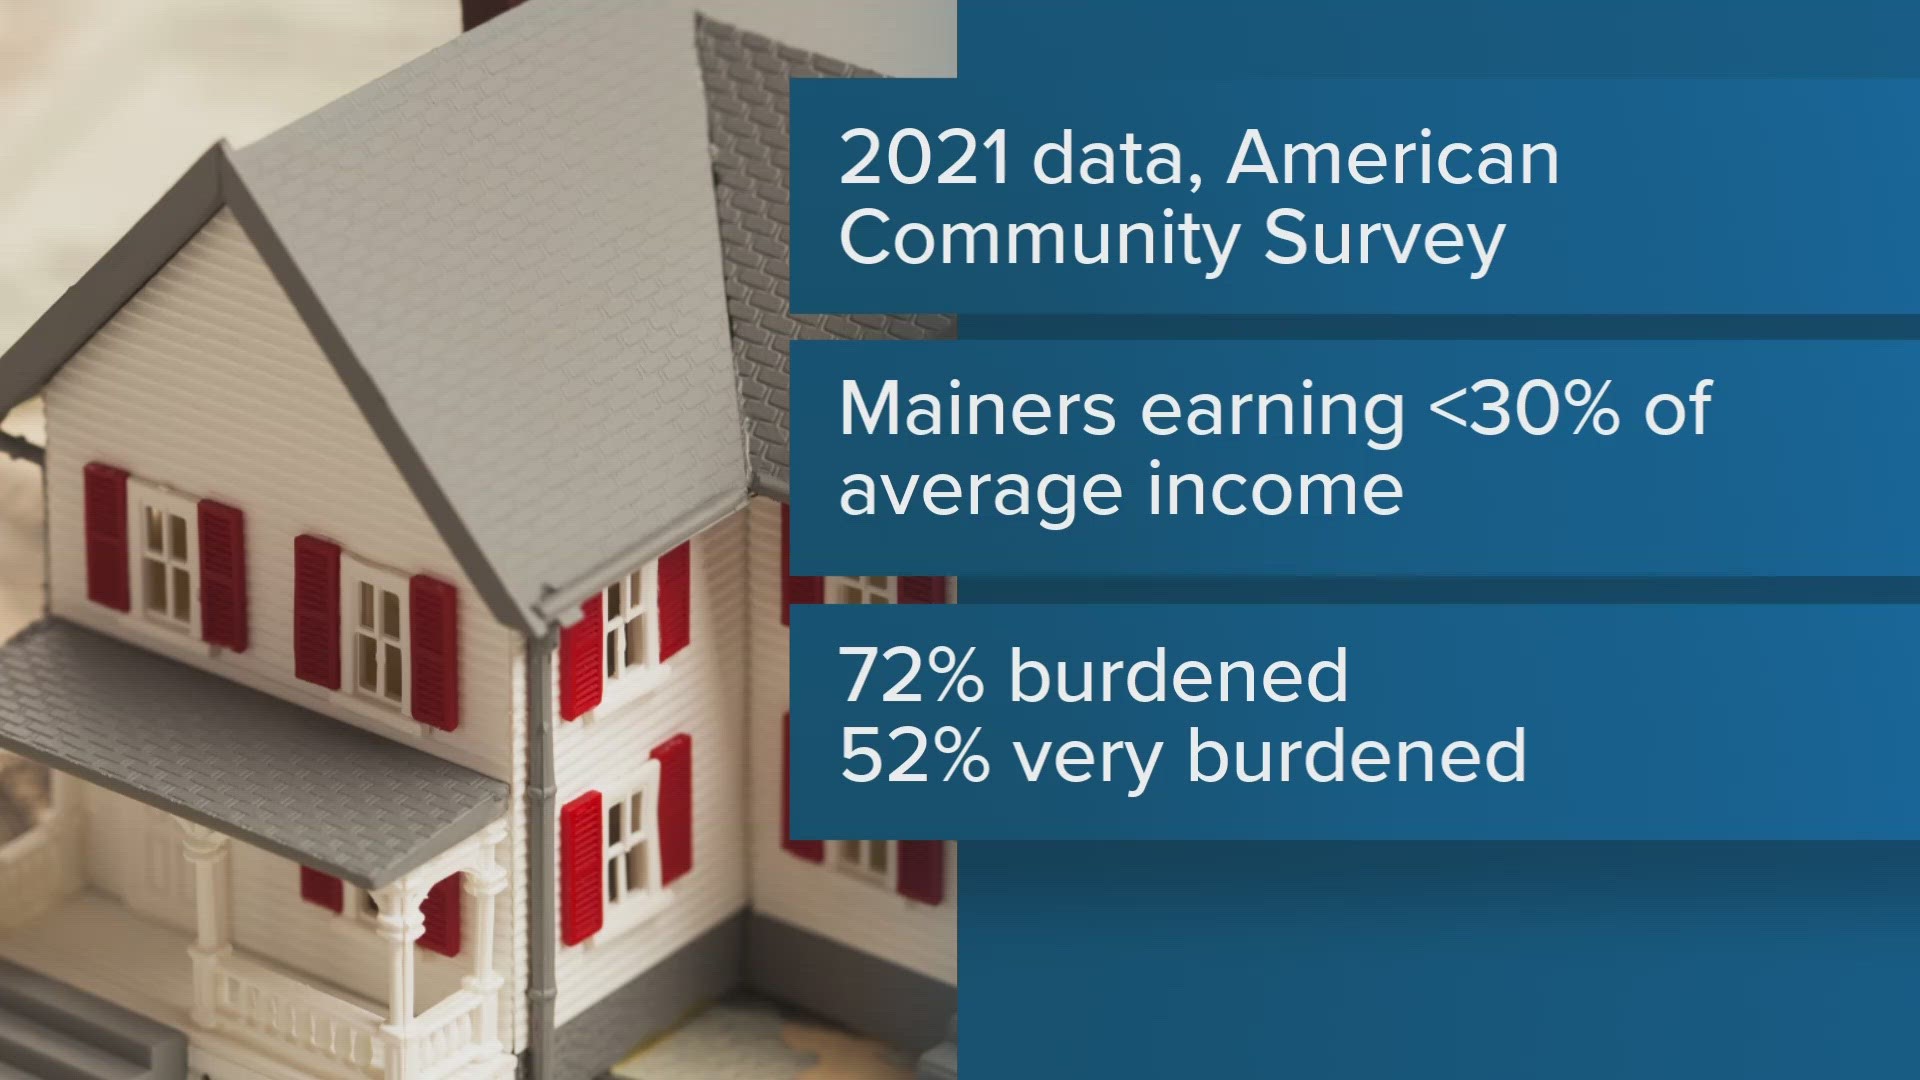 The report by the National Low Income Housing Coalition used data from the 2021 American Community Survey.